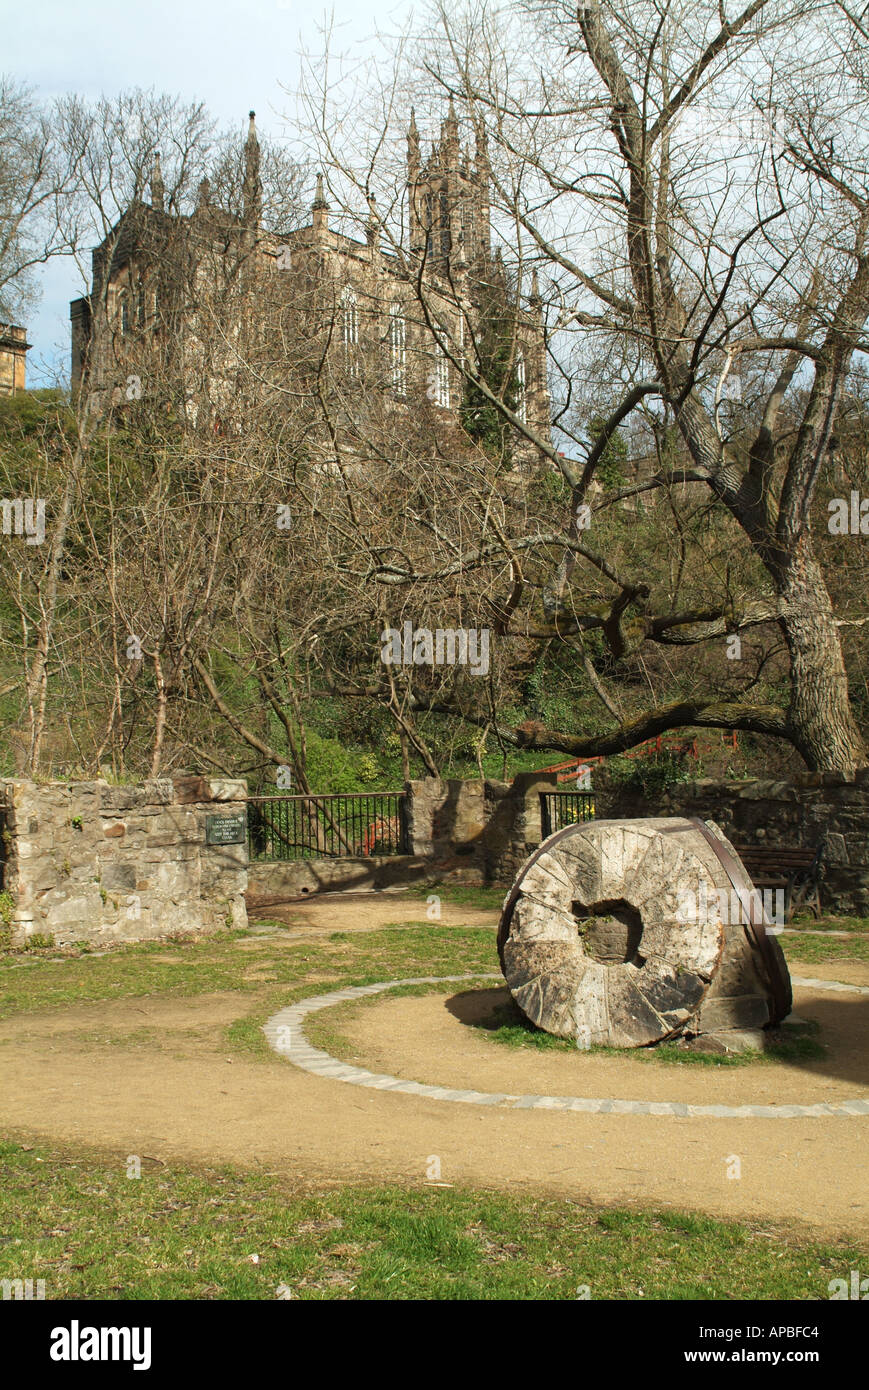 The site of Lindsay's Mill with the former Holy Trinity Church in the background, Dean Village, Edinburgh, Scotland, UK. Stock Photo